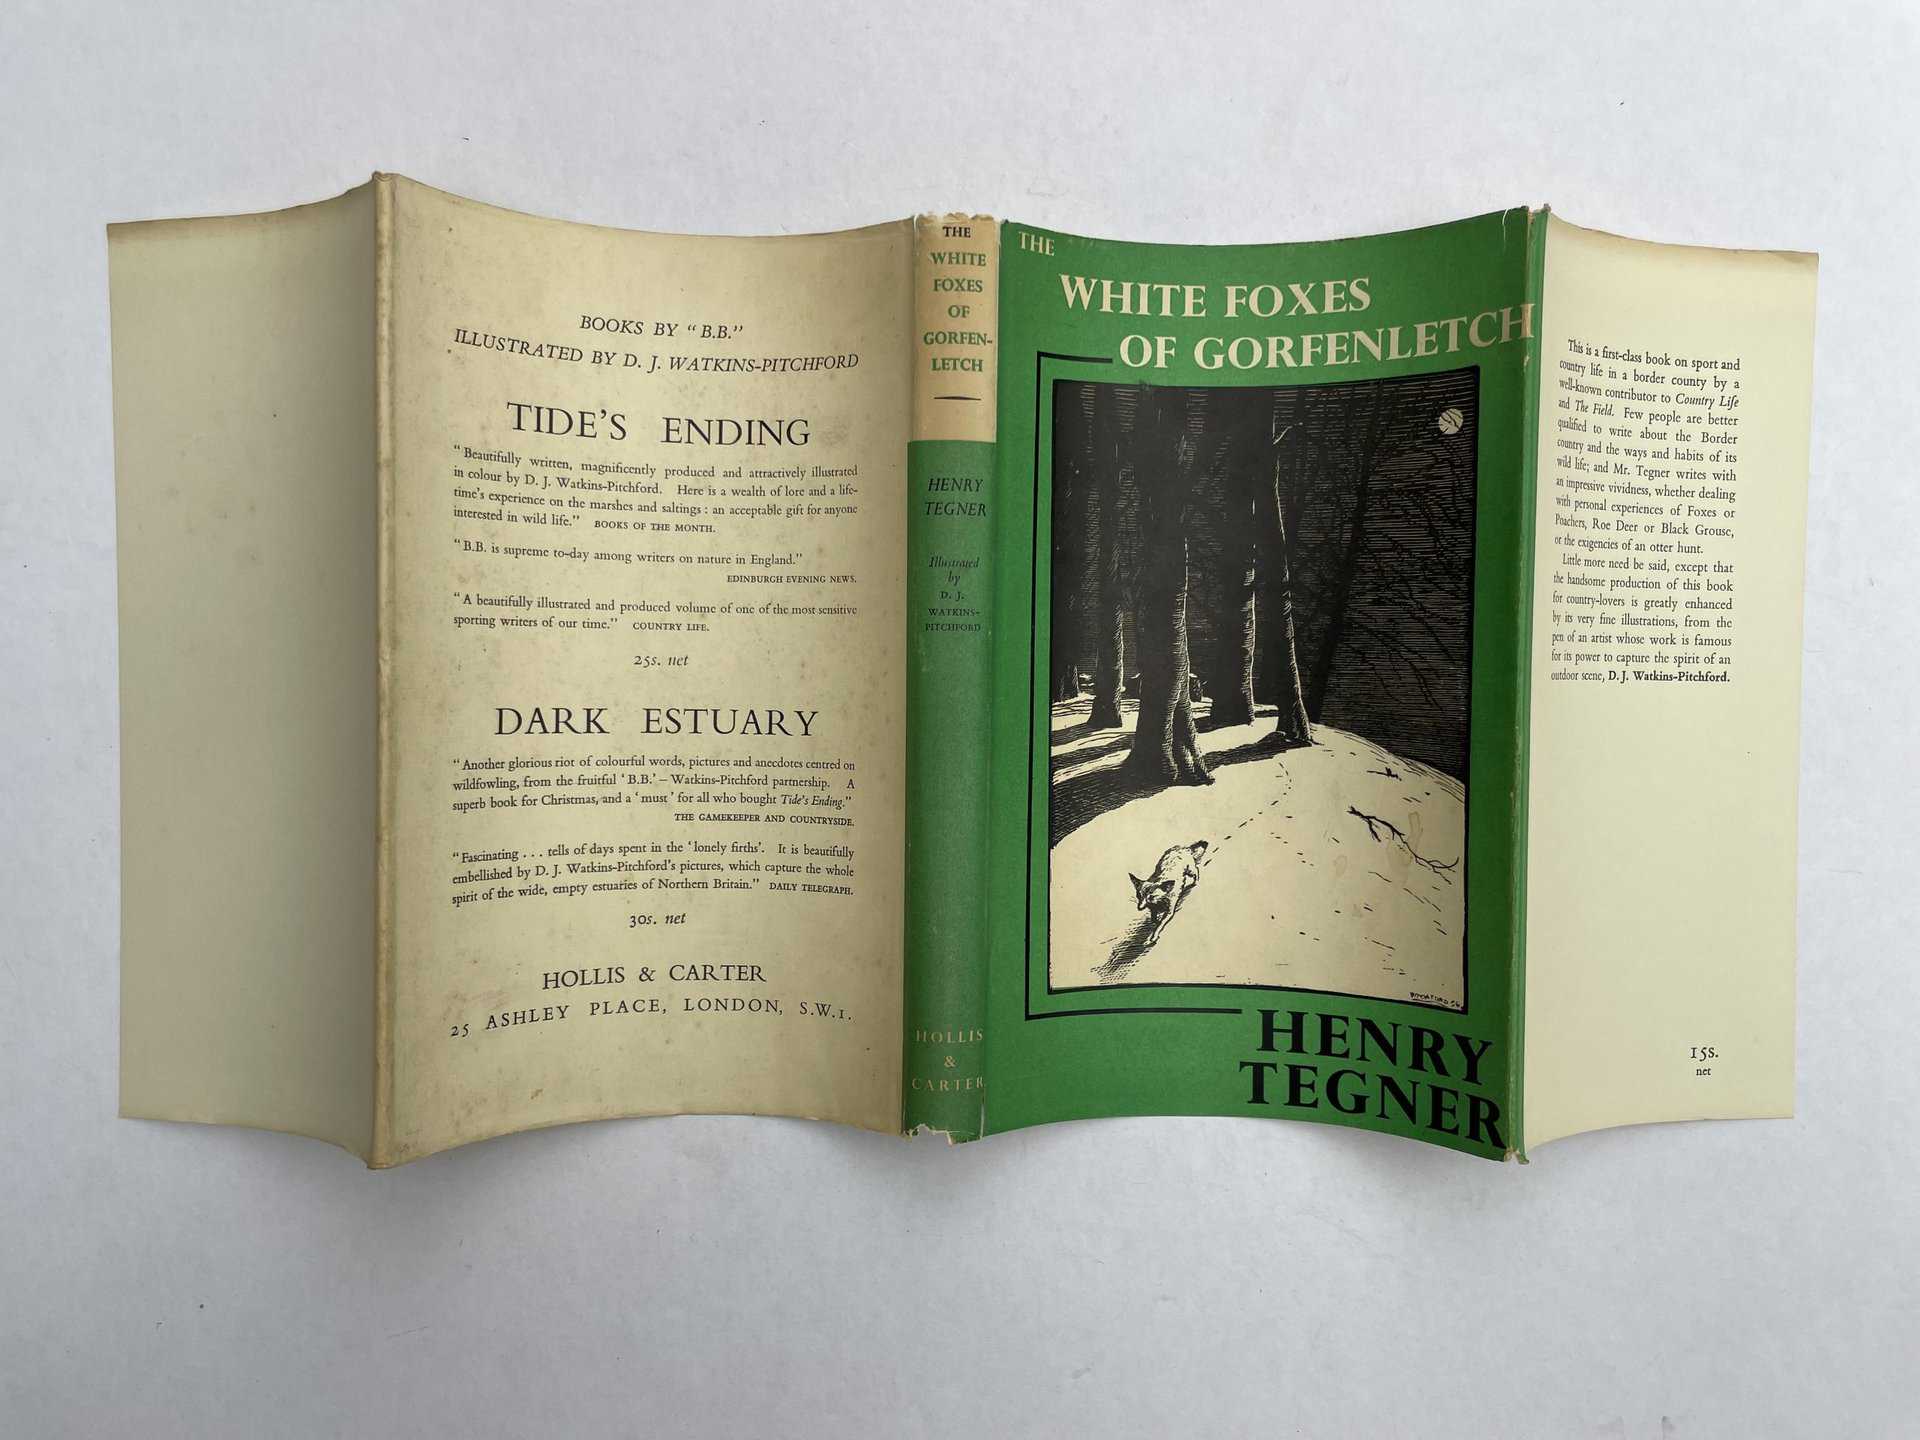 henry tegner the white foxes of gorfenletch signed first ed5